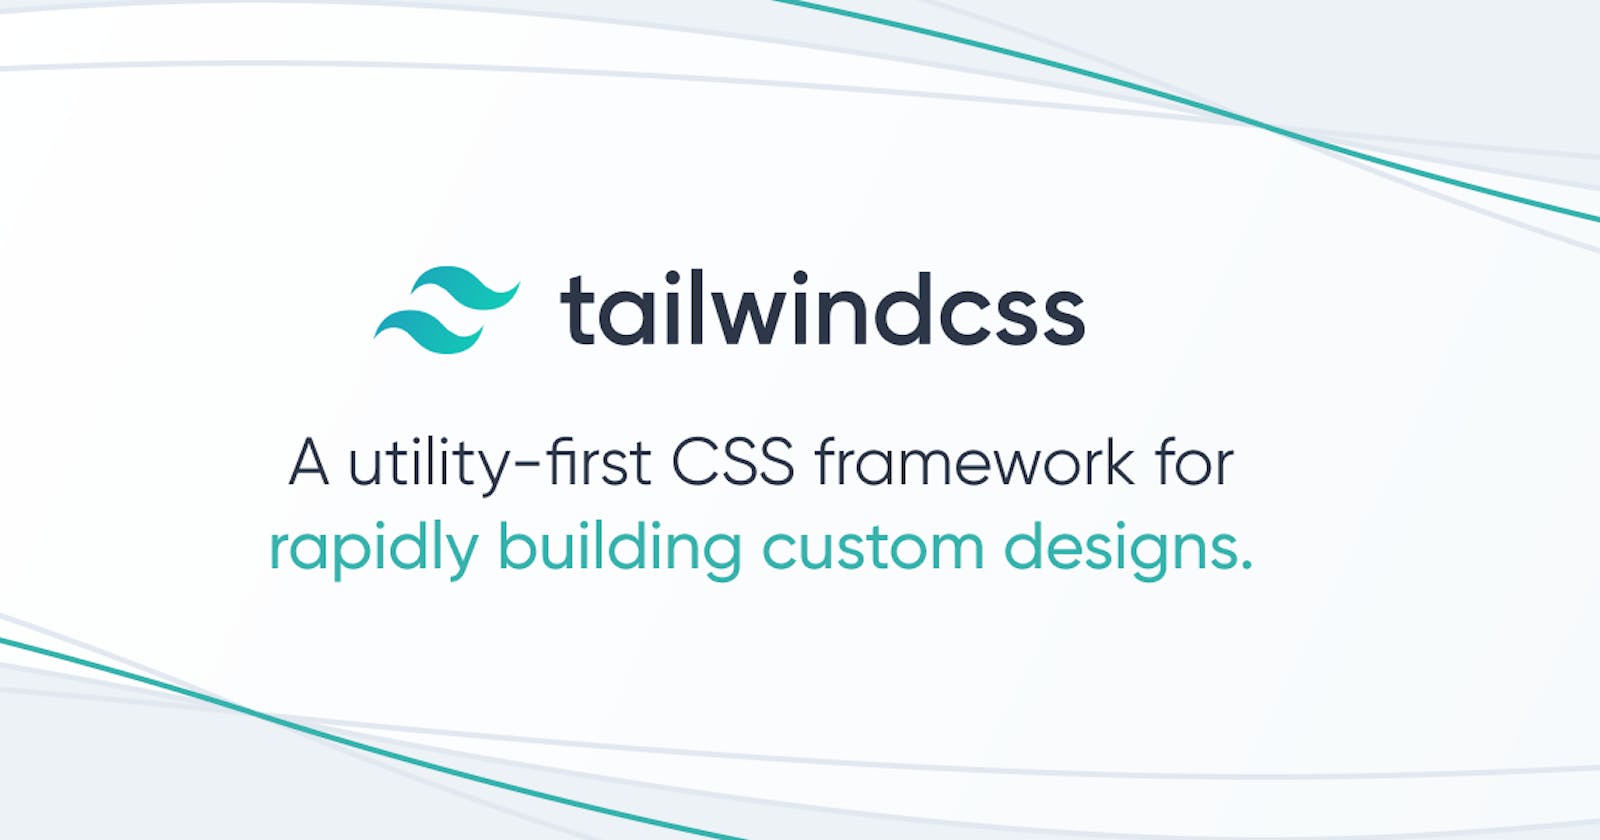 Why Tailwind CSS is so popular among UI developers